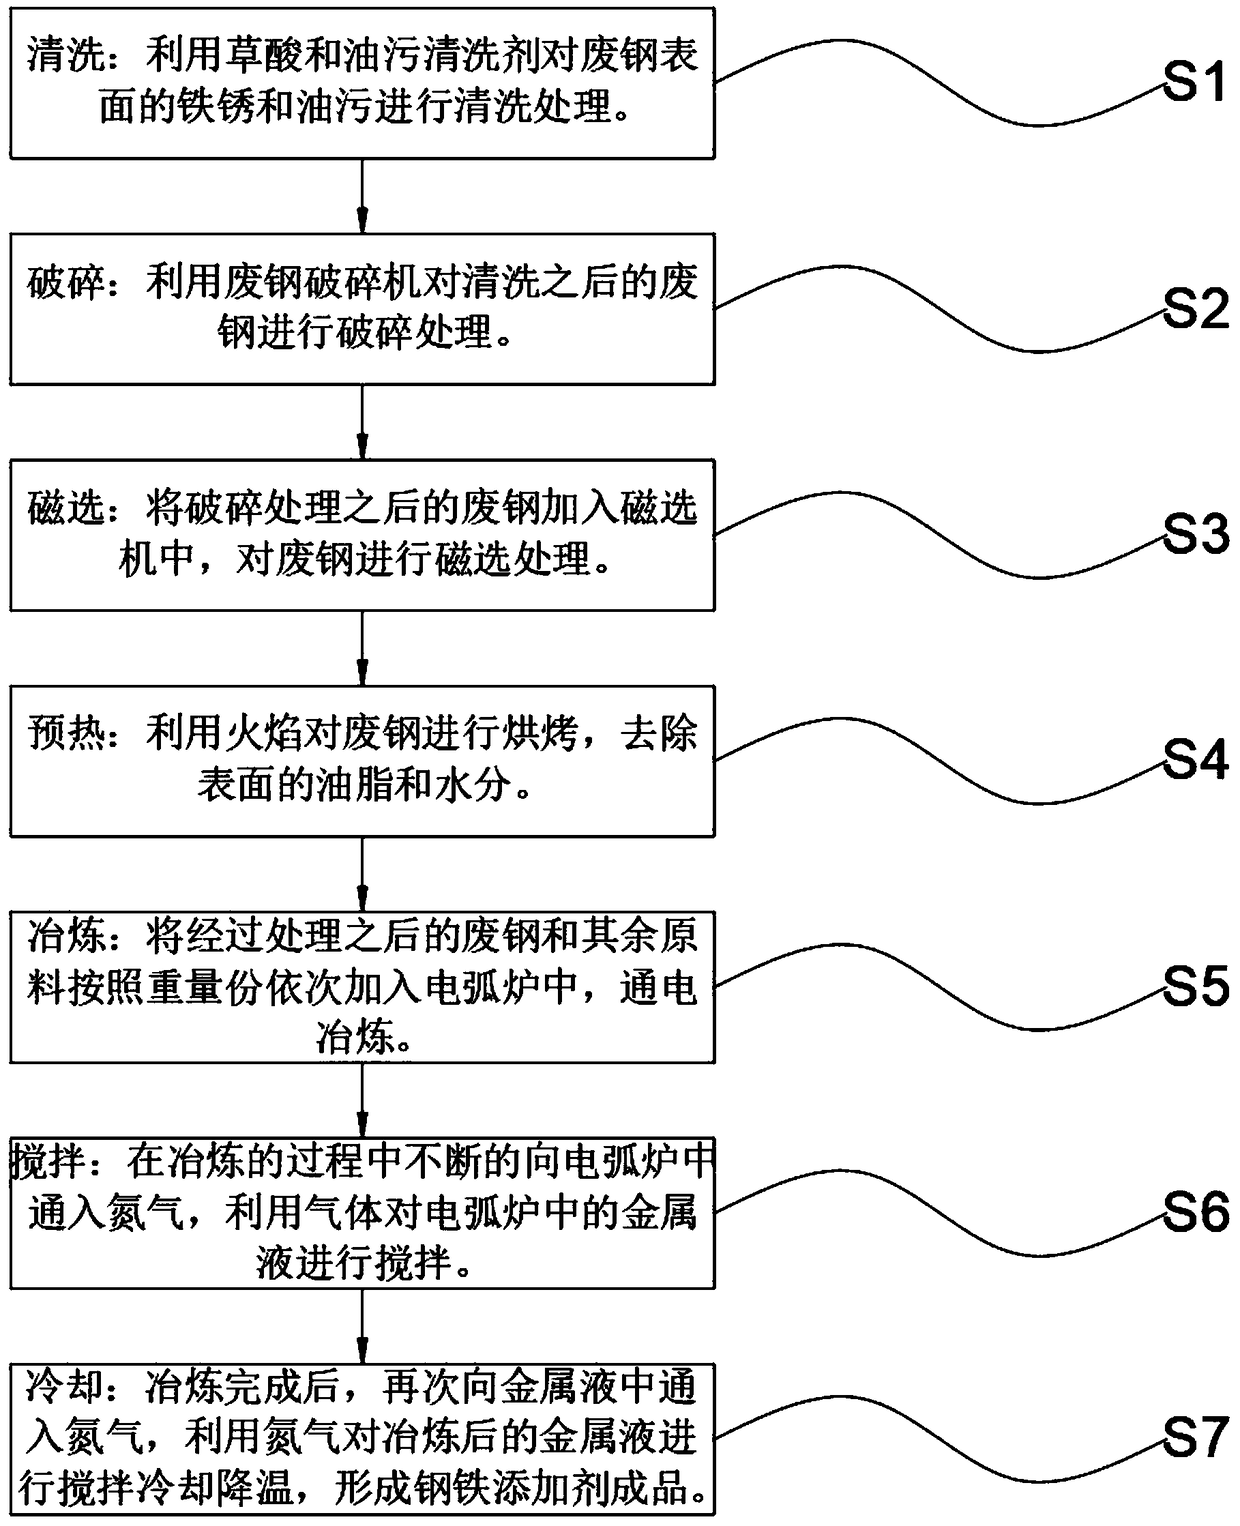 Method for preparing steel additive by taking waste steel as raw material